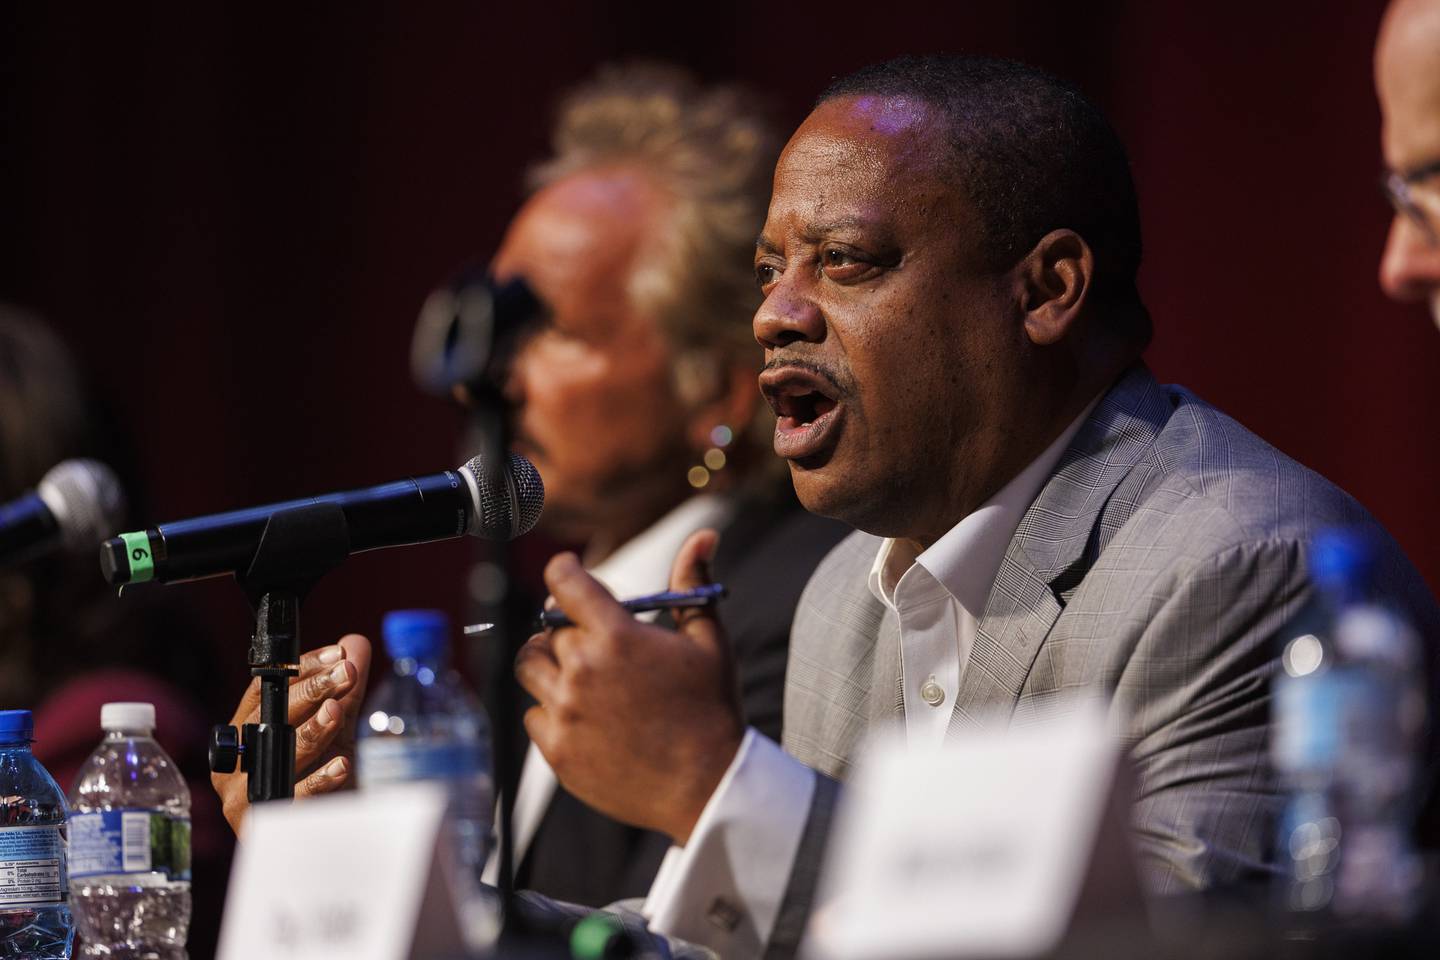 Ald. Roderick Sawyer, 6th, attends a mayoral candidate forum at the Copernicus Center on Dec. 13, 2022.